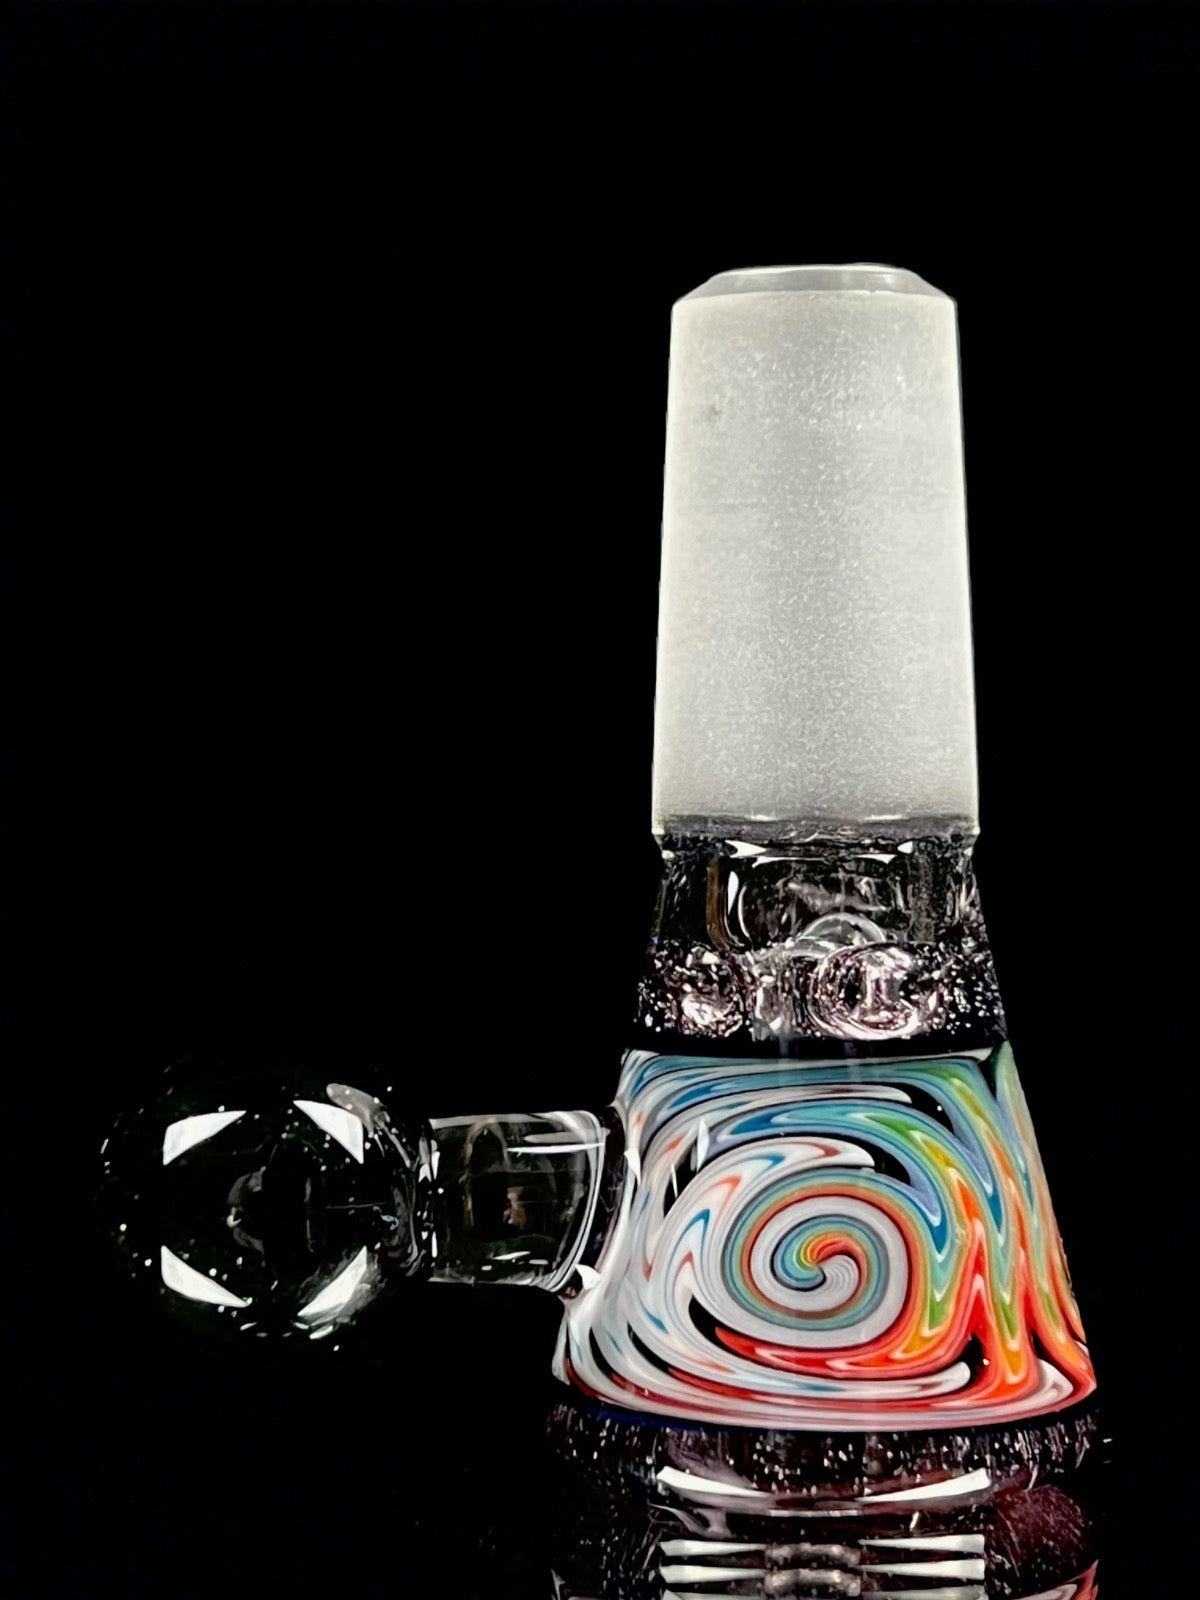 14mm cool pink slide by Mercurius Glass